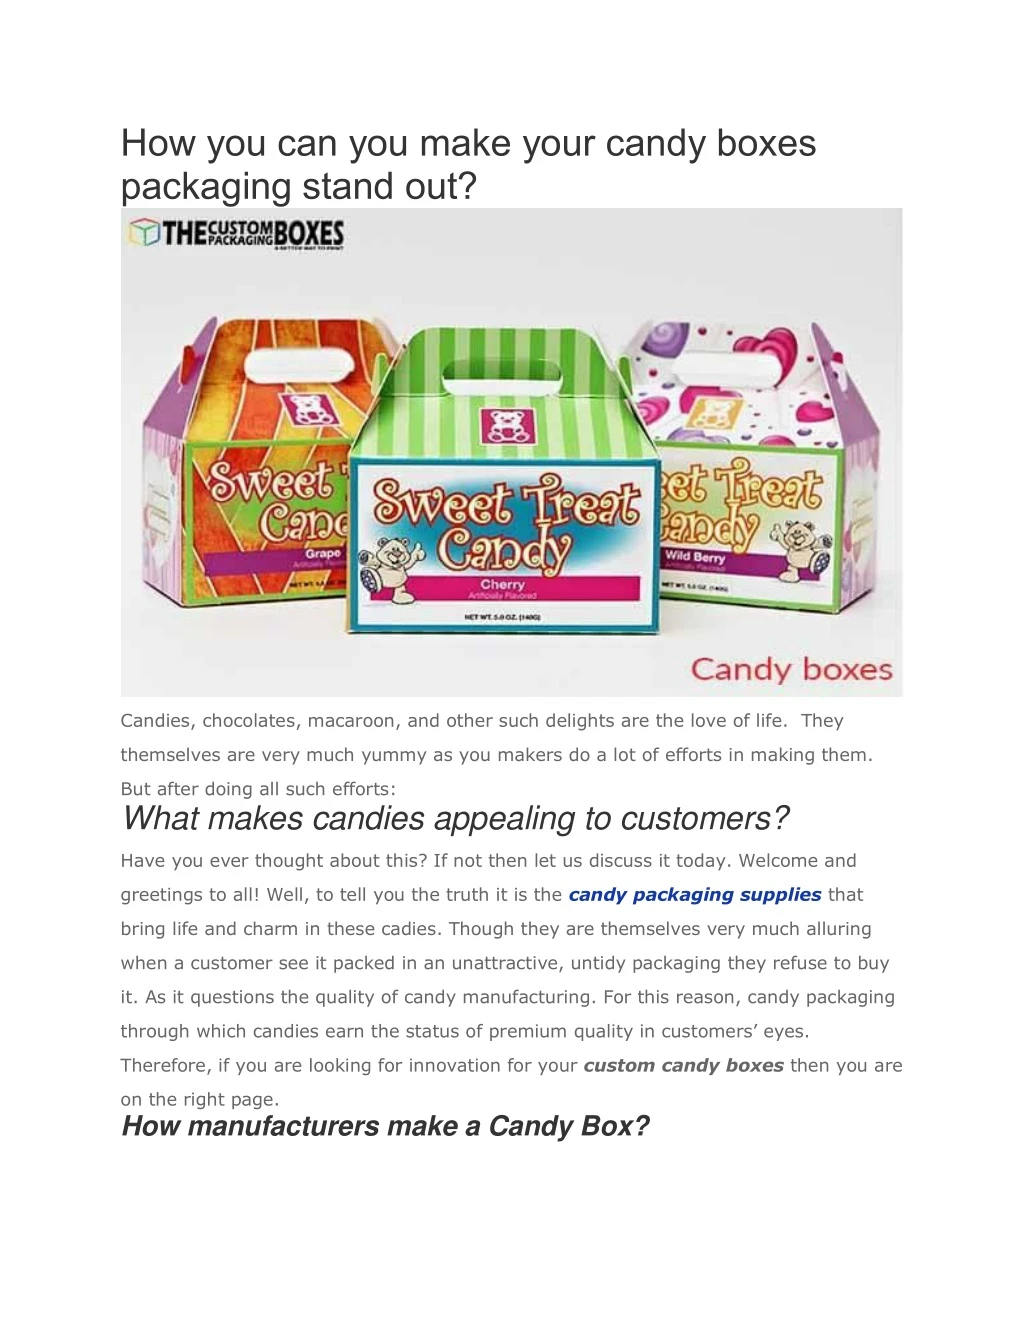 how you can you make your candy boxes packaging